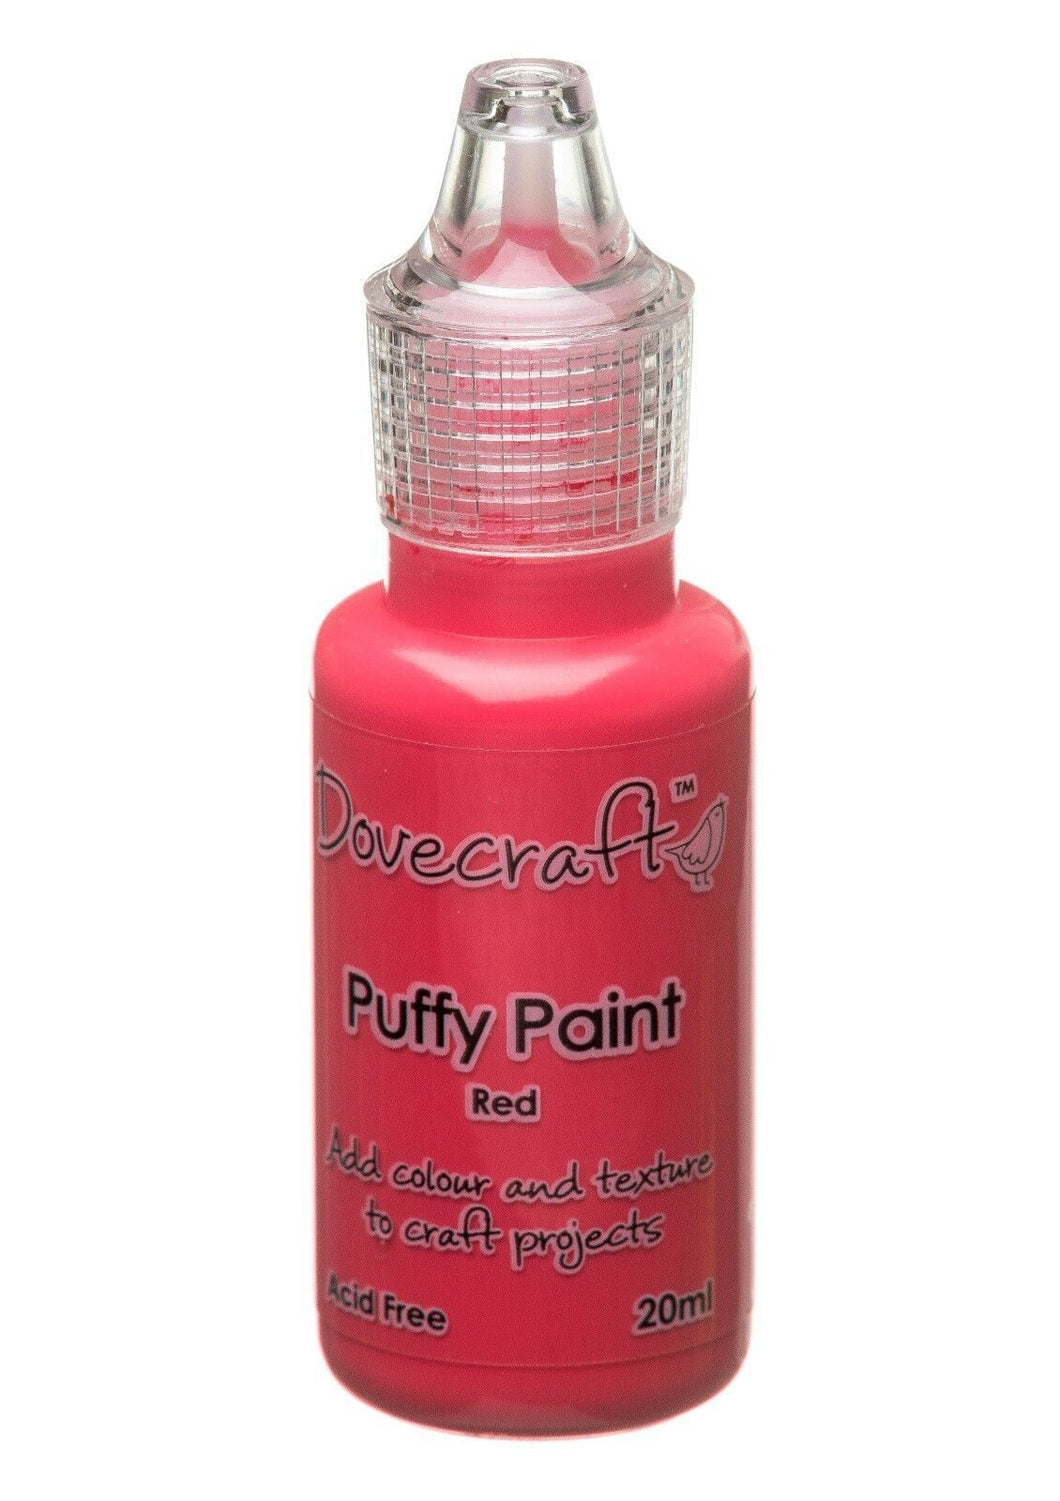 Dovecraft - Puffy Paint - Easy Application - 20ml - Red